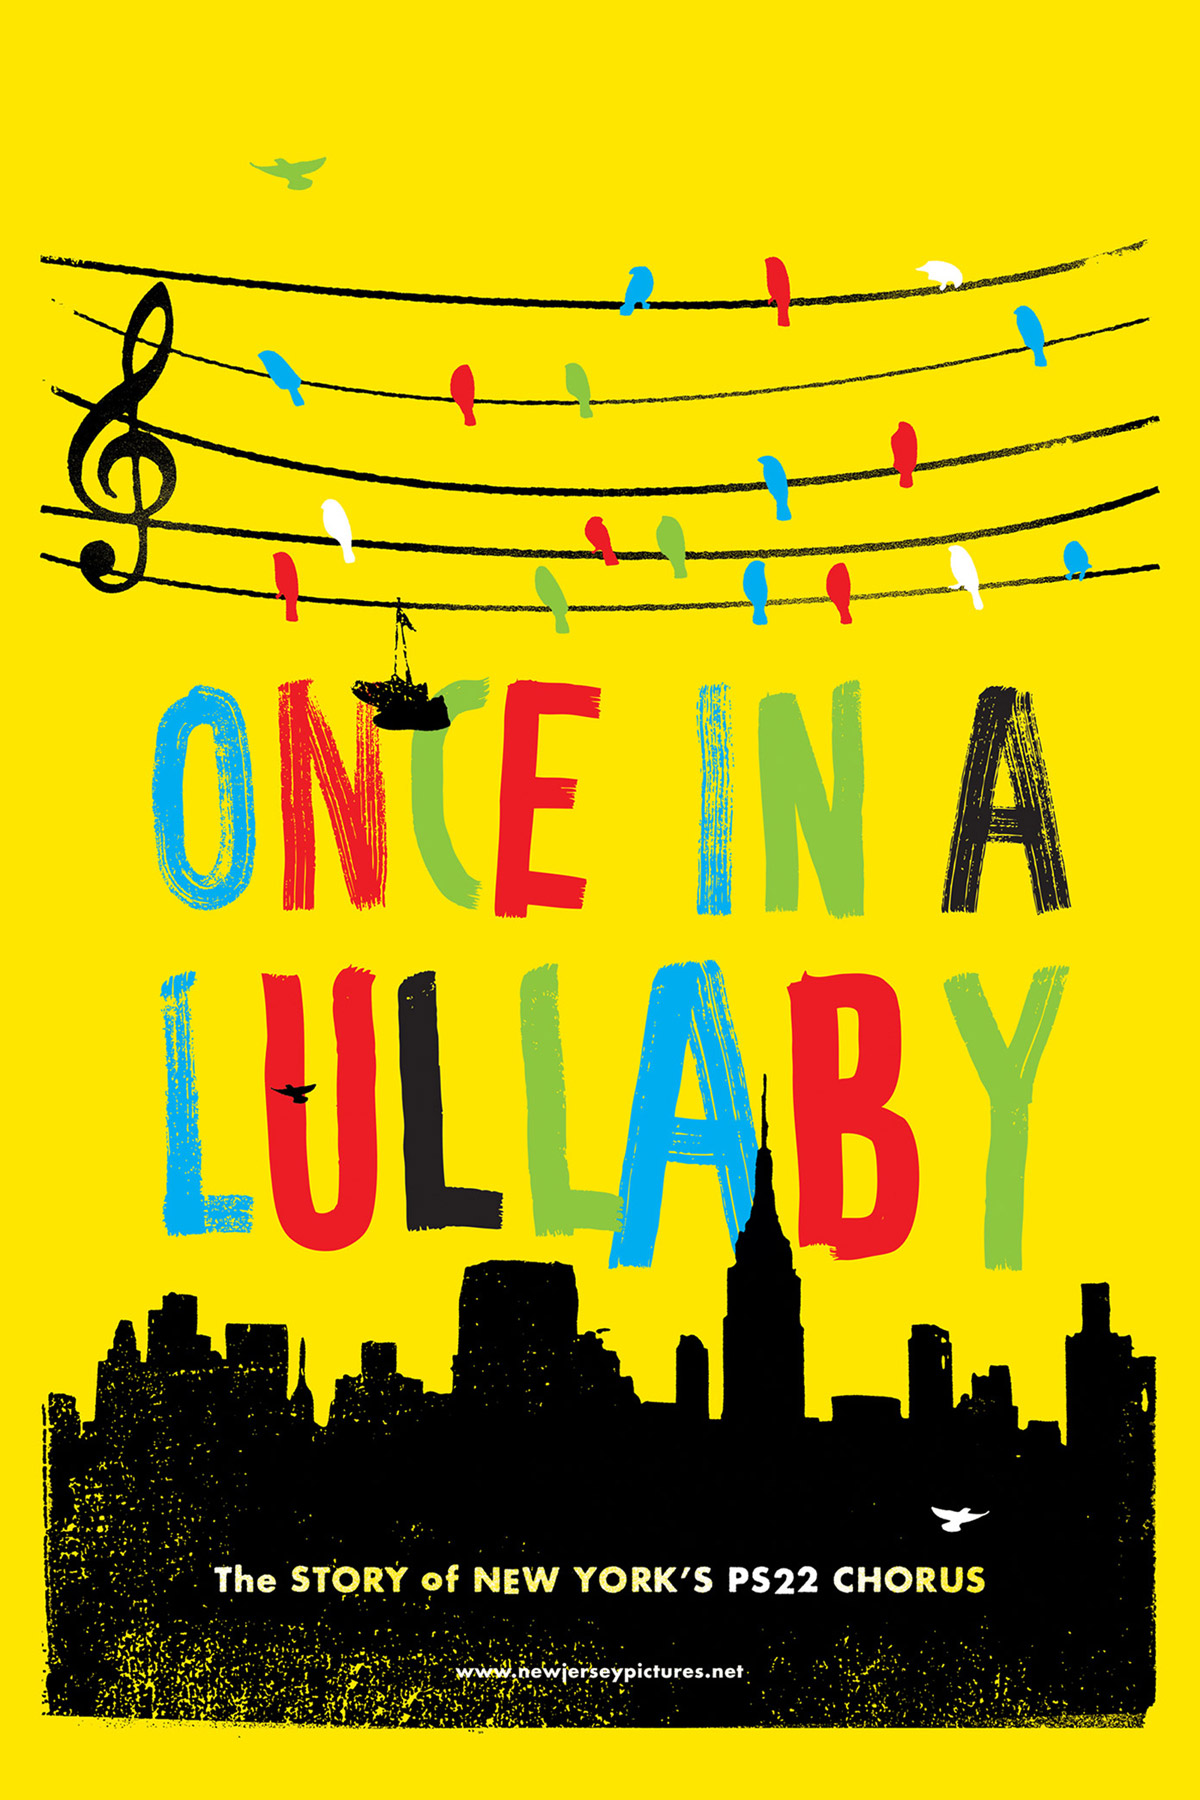 Once in a Lullaby Poster - The Heads of State